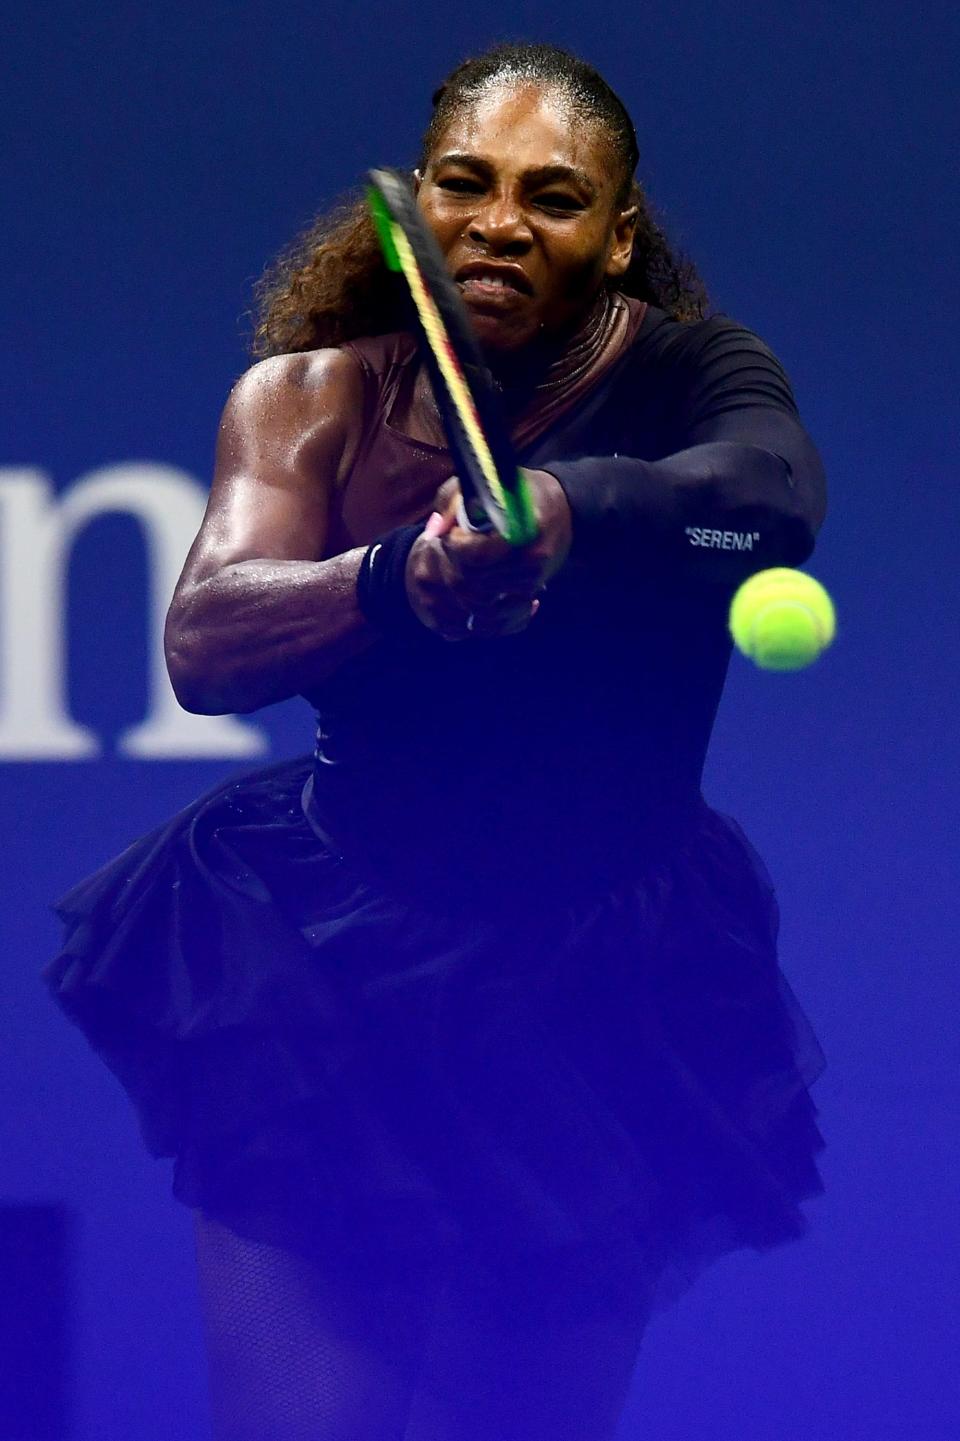 Serena Williams during the 2018 US Open.